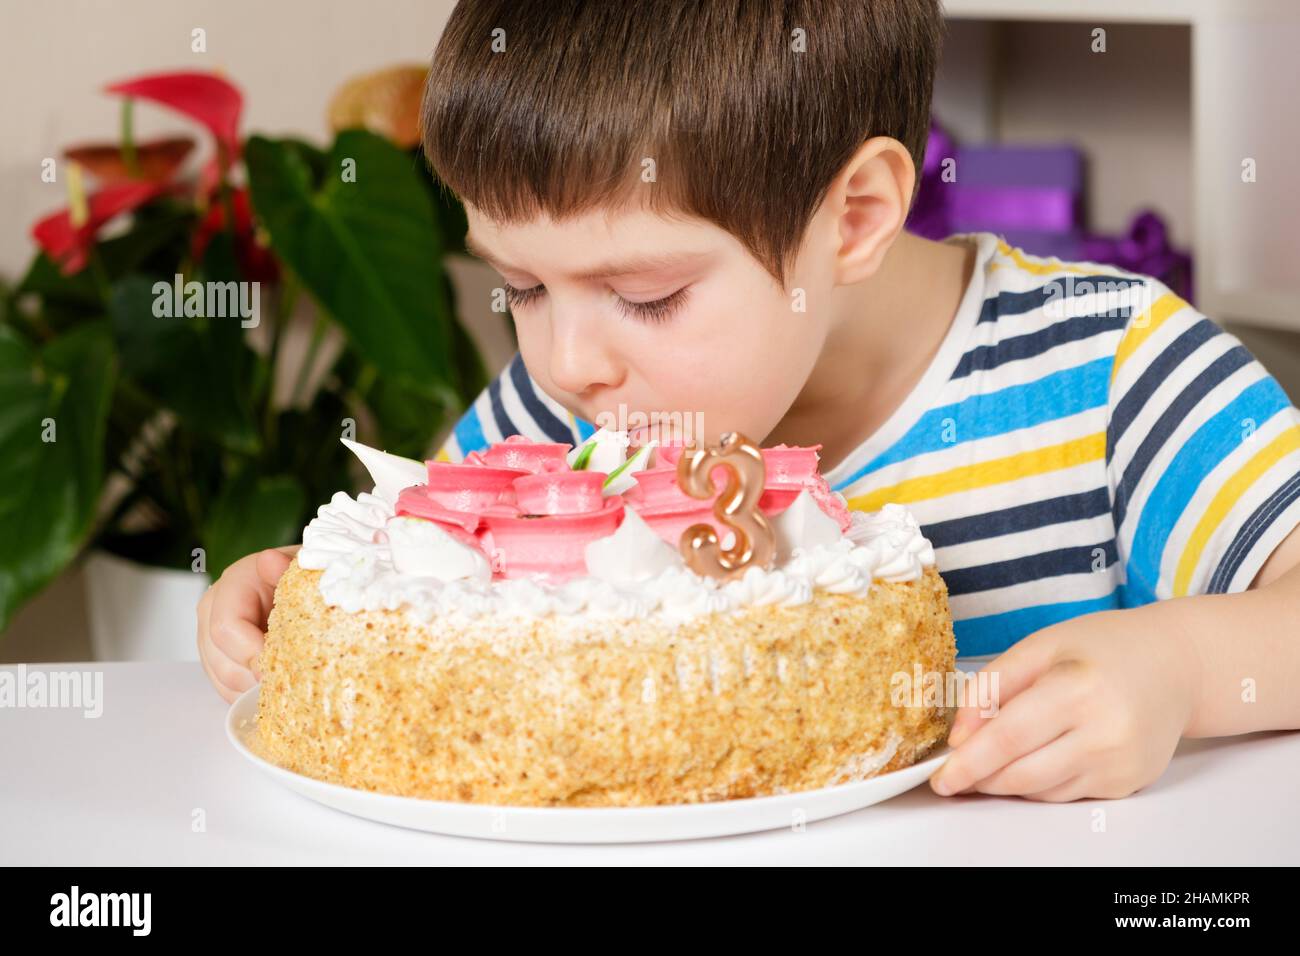 A child of 3 years old eats a birthday cake, licks the cream from the top sitting at the table Stock Photo